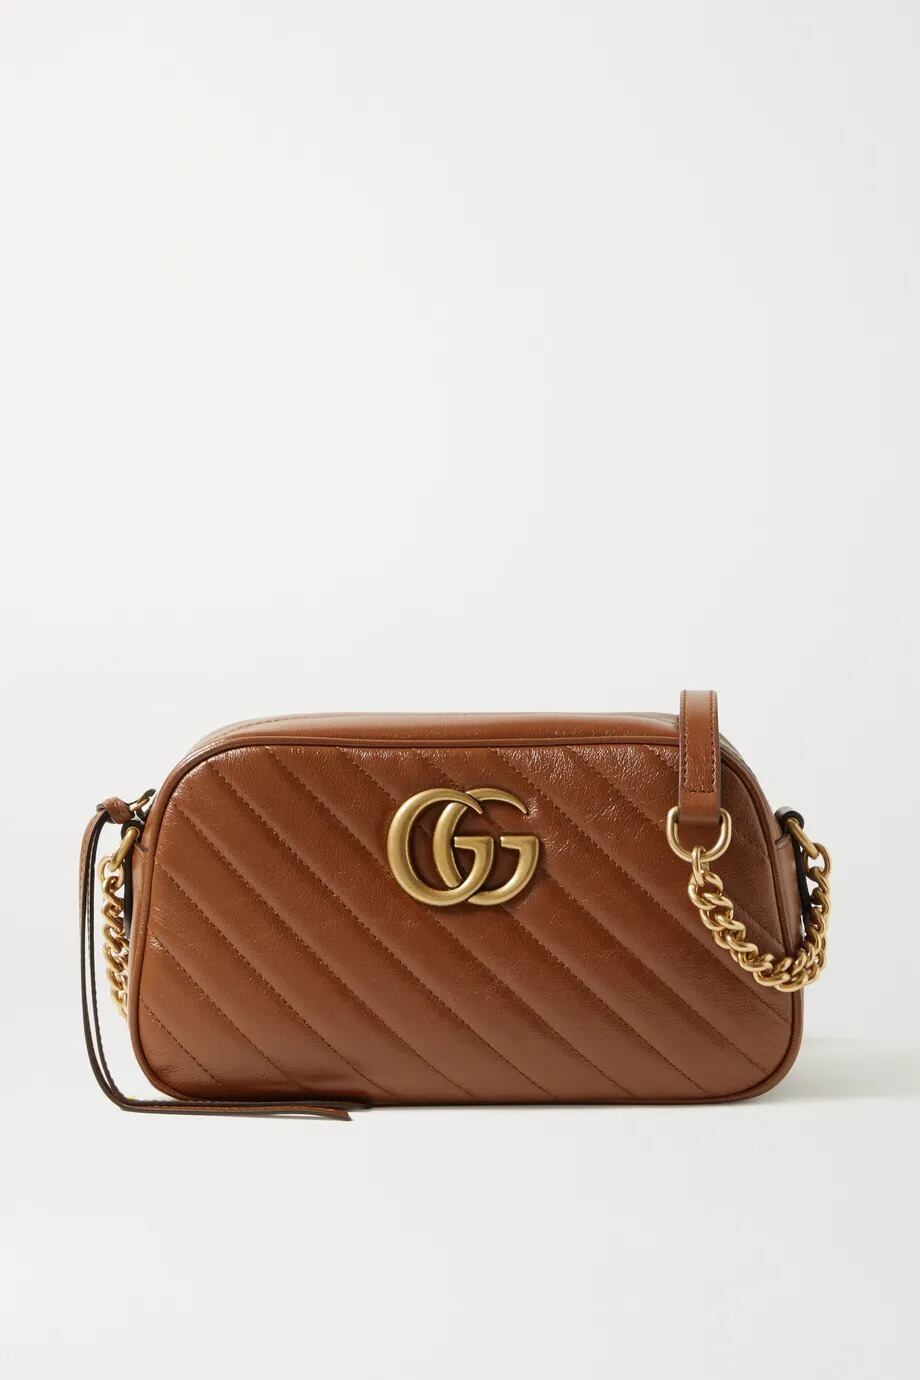 GUCCI　GG Marmont　Small　キルティングレザー　ショルダーバッグ　ブラウン | noble powered by BASE